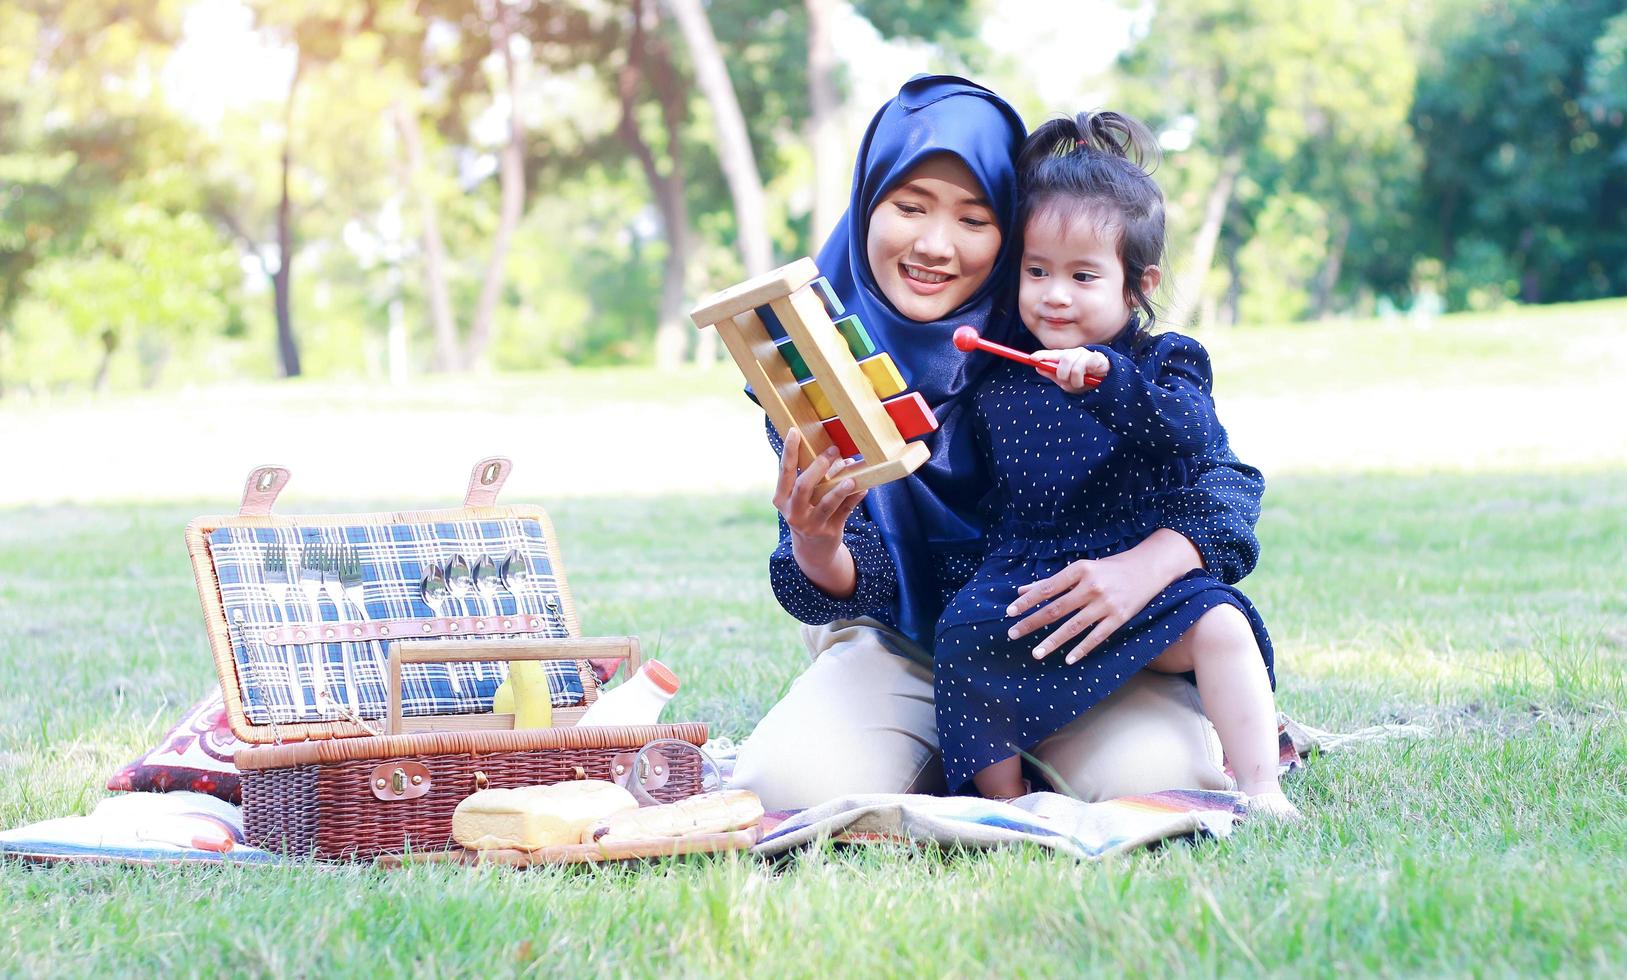 Muslim mothers and daughters enjoy their holidays in the park. Love and bond between mother and child photo